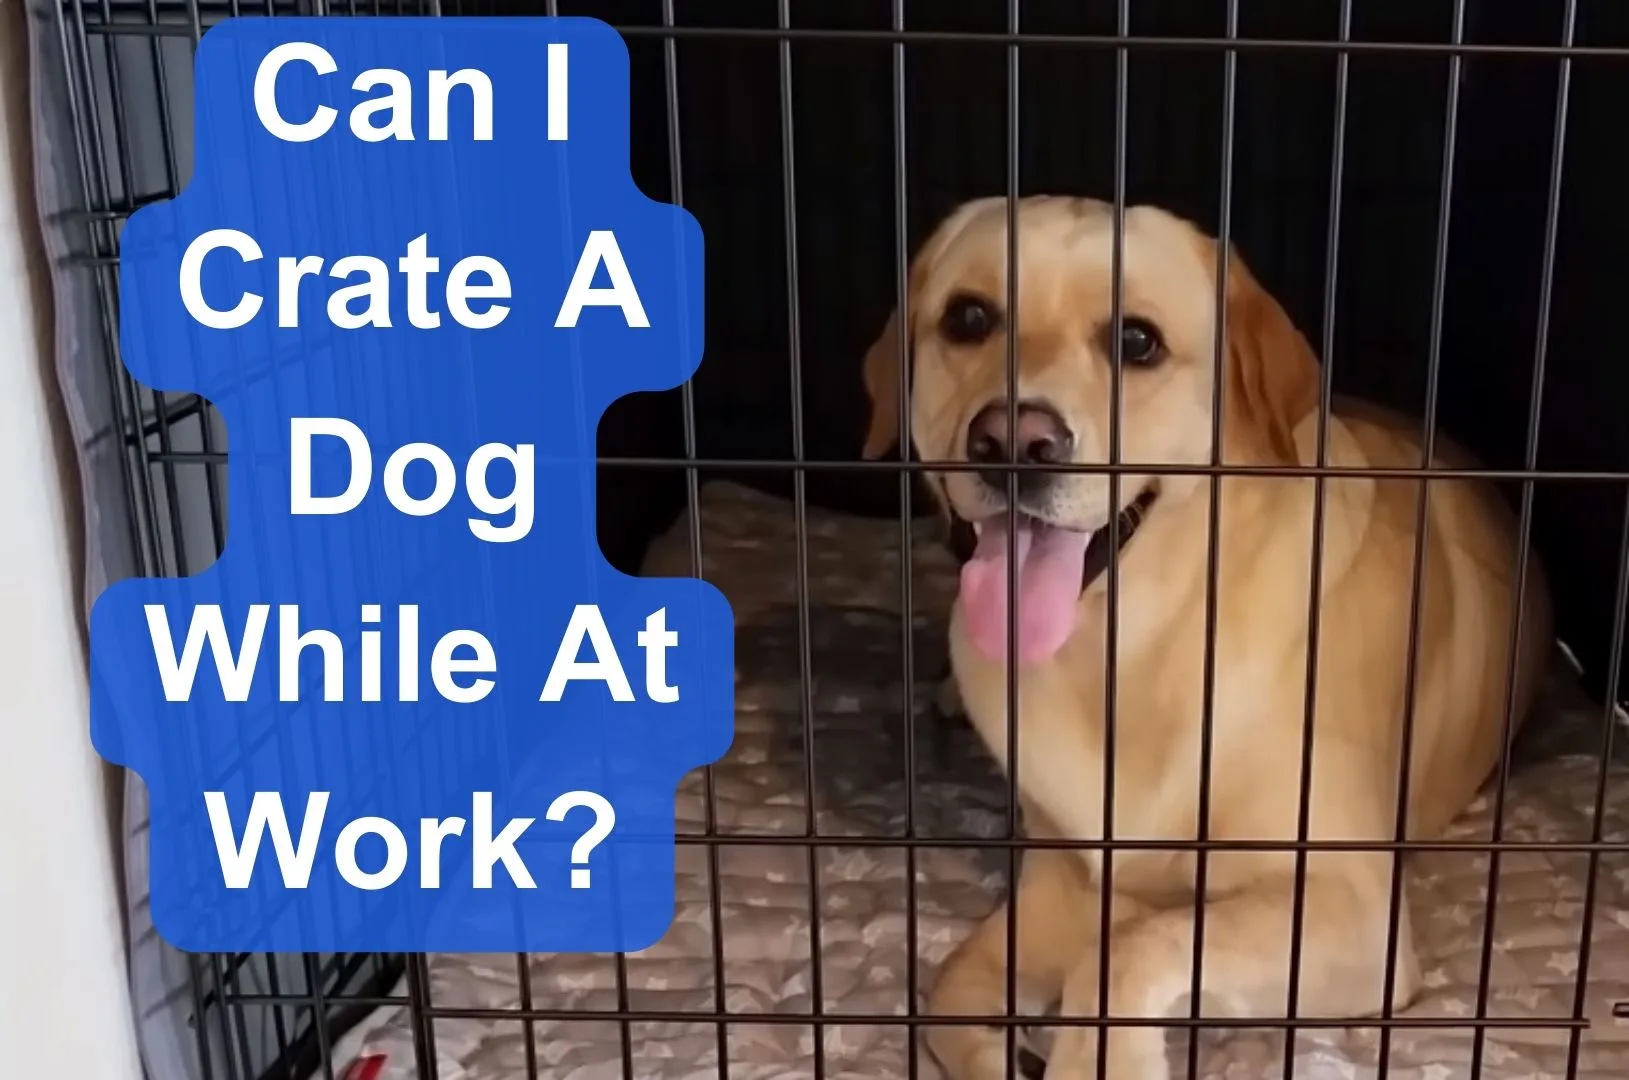 can I crate a dog while at work